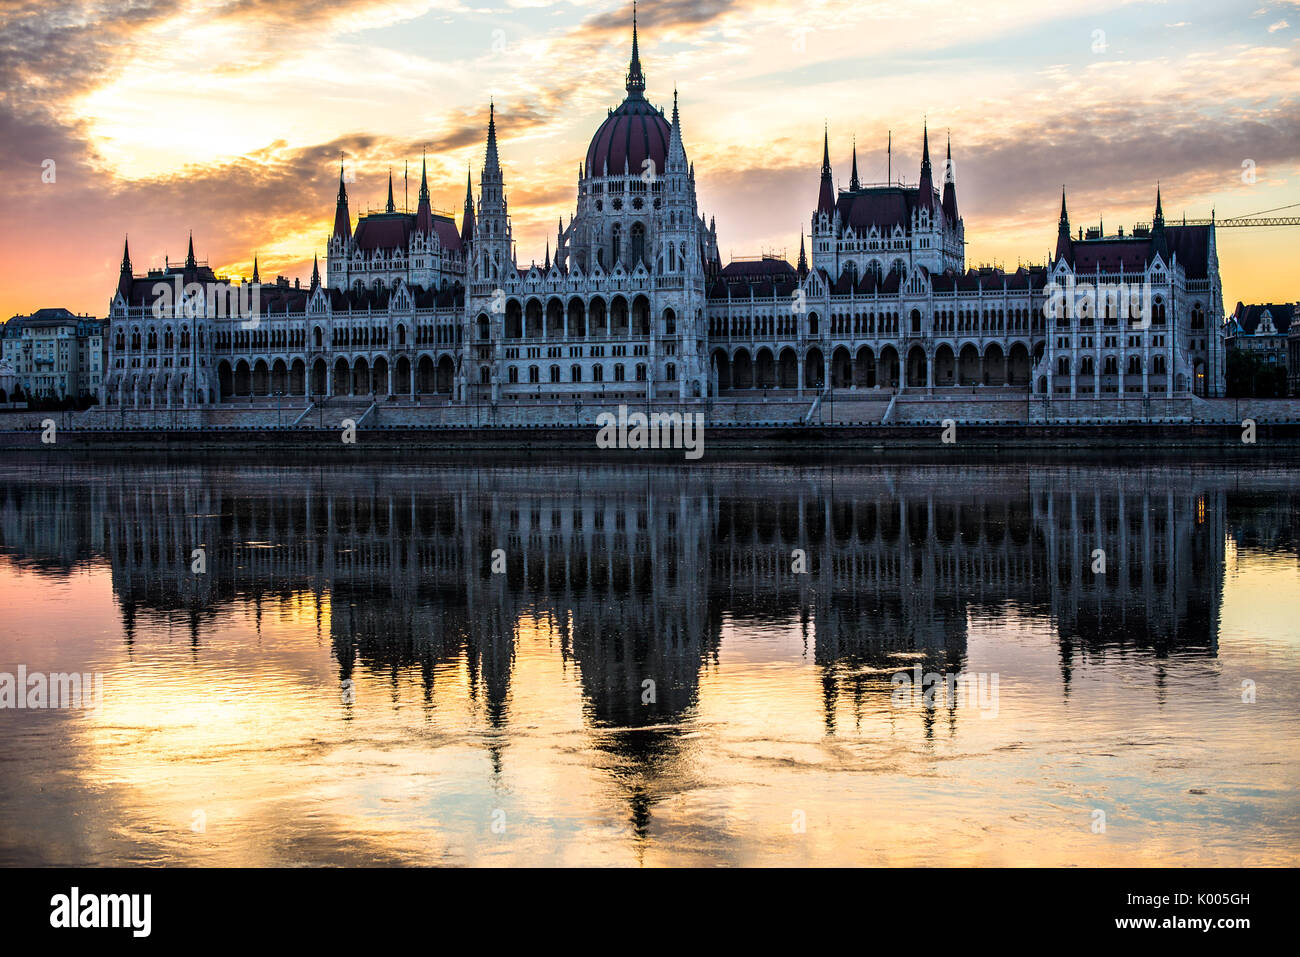 The Hungarian Parliament Building, Parliament of Budapest located in the city the seat of the National Assembly of Hungary Országház  Gothic Revival. Stock Photo